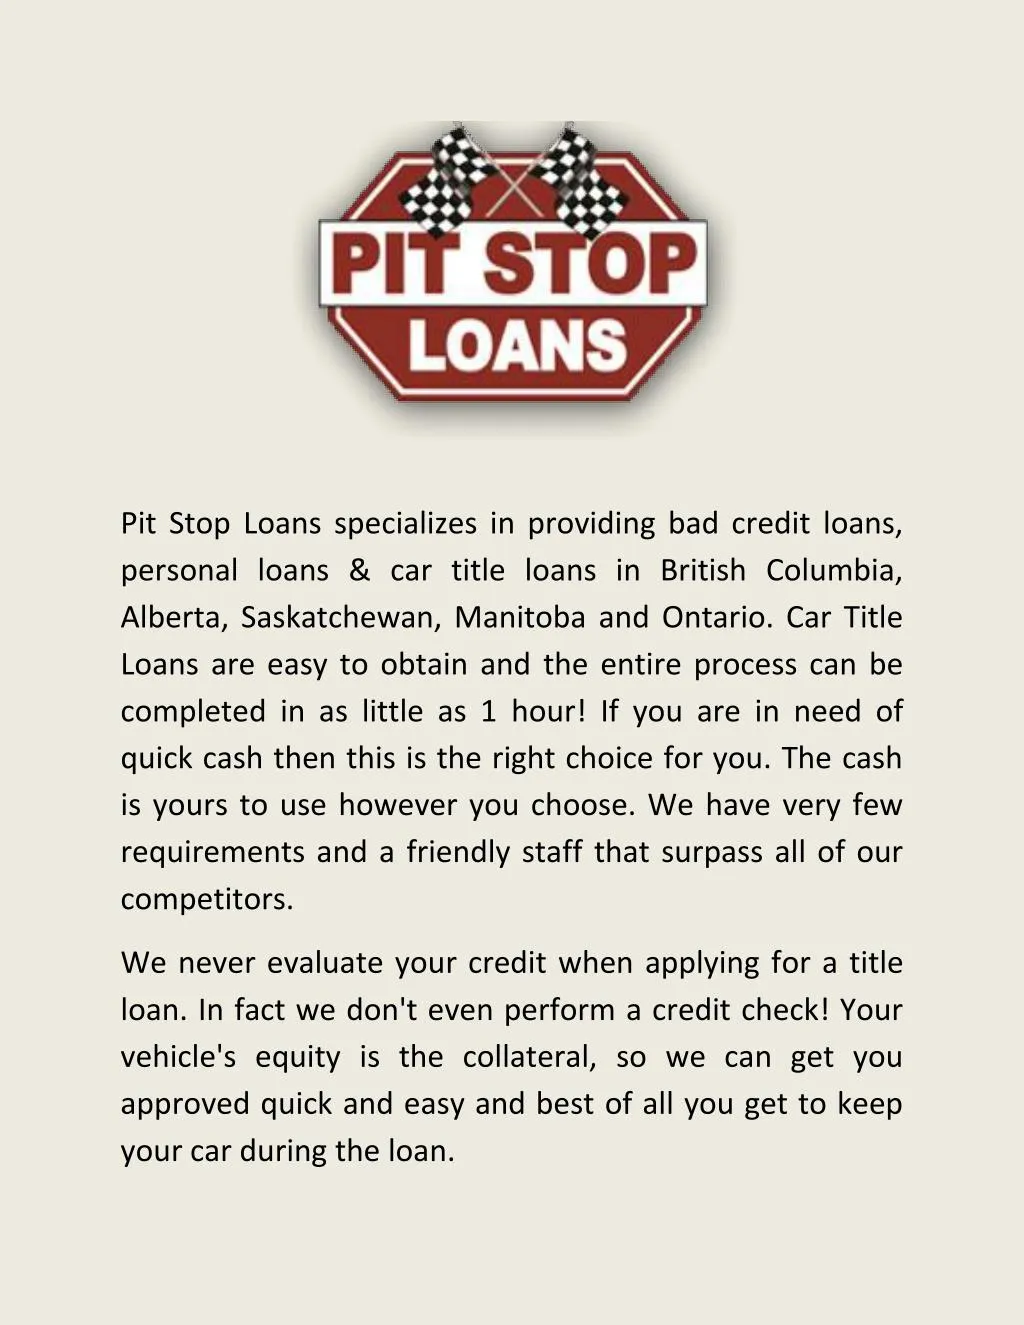 pit stop loans specializes in providing